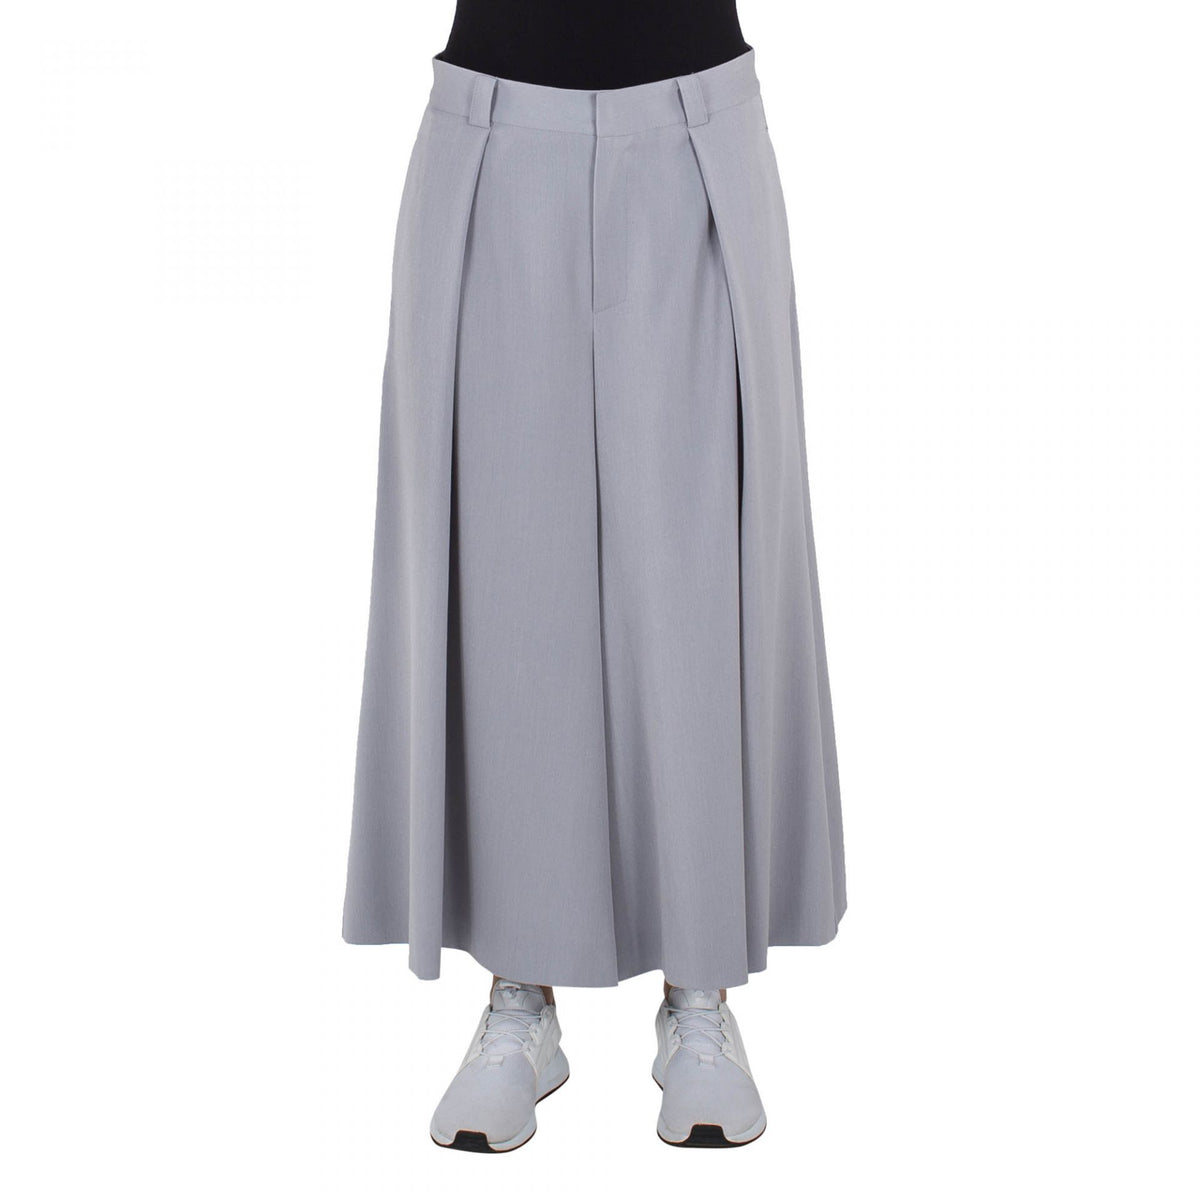 WIDE TROUSERS GREY